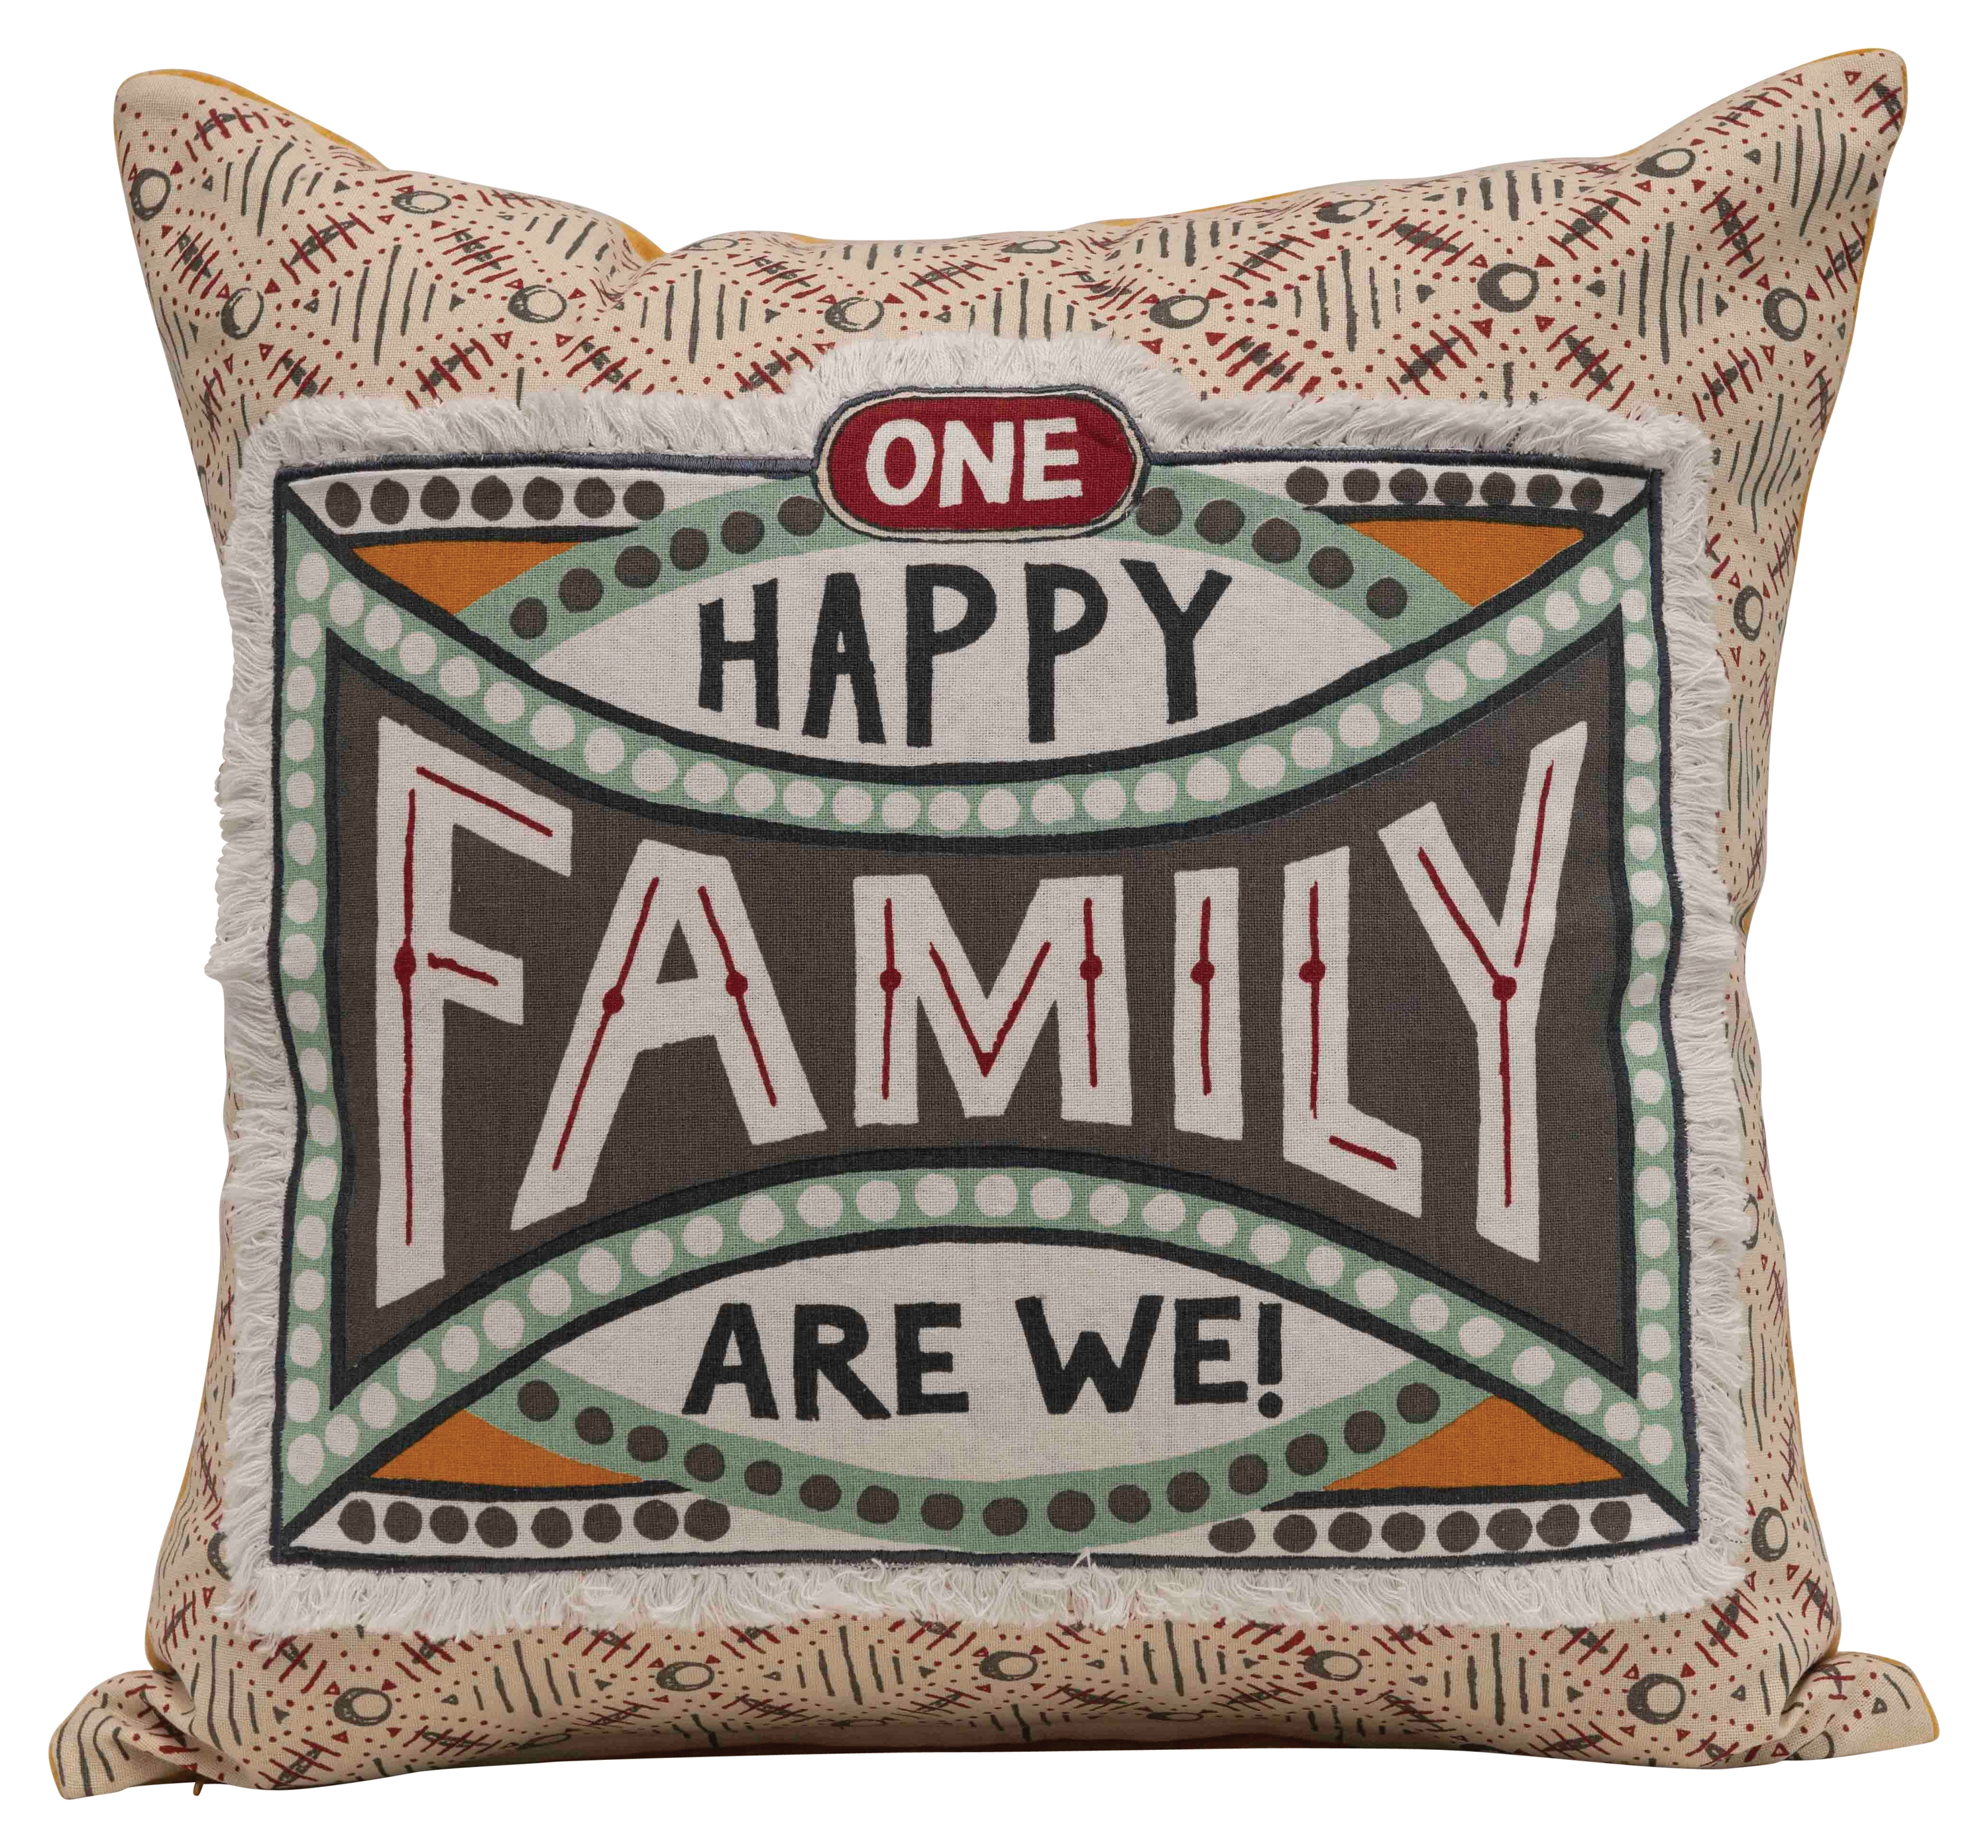 "One Happy Family Are We!" Reversible Cotton Stamp Pillow with Solid Back - Image 0